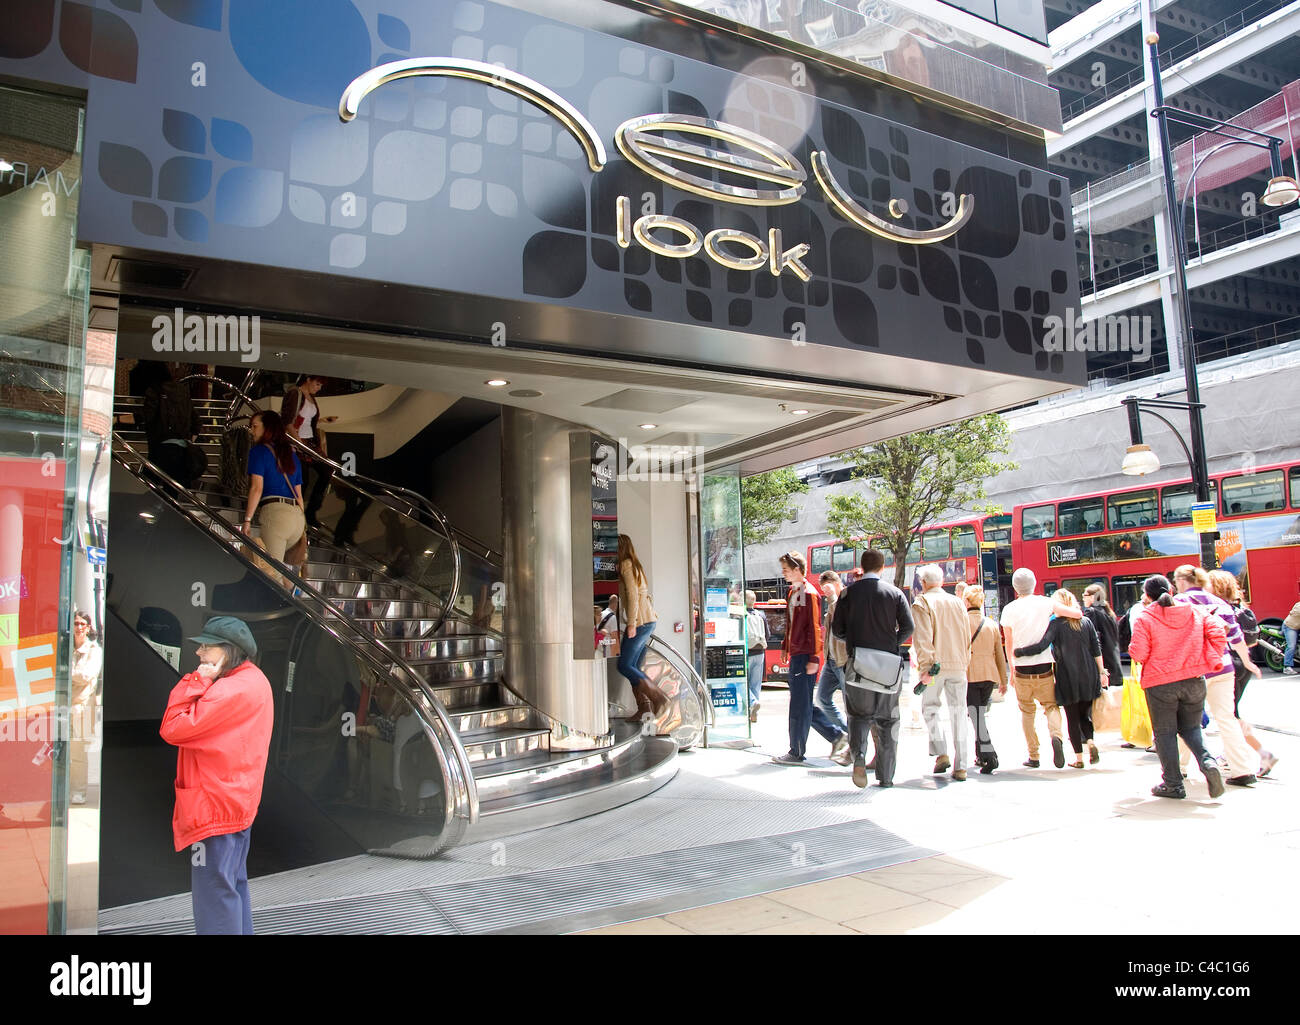 New Look Store on Oxford Street Stock Photo